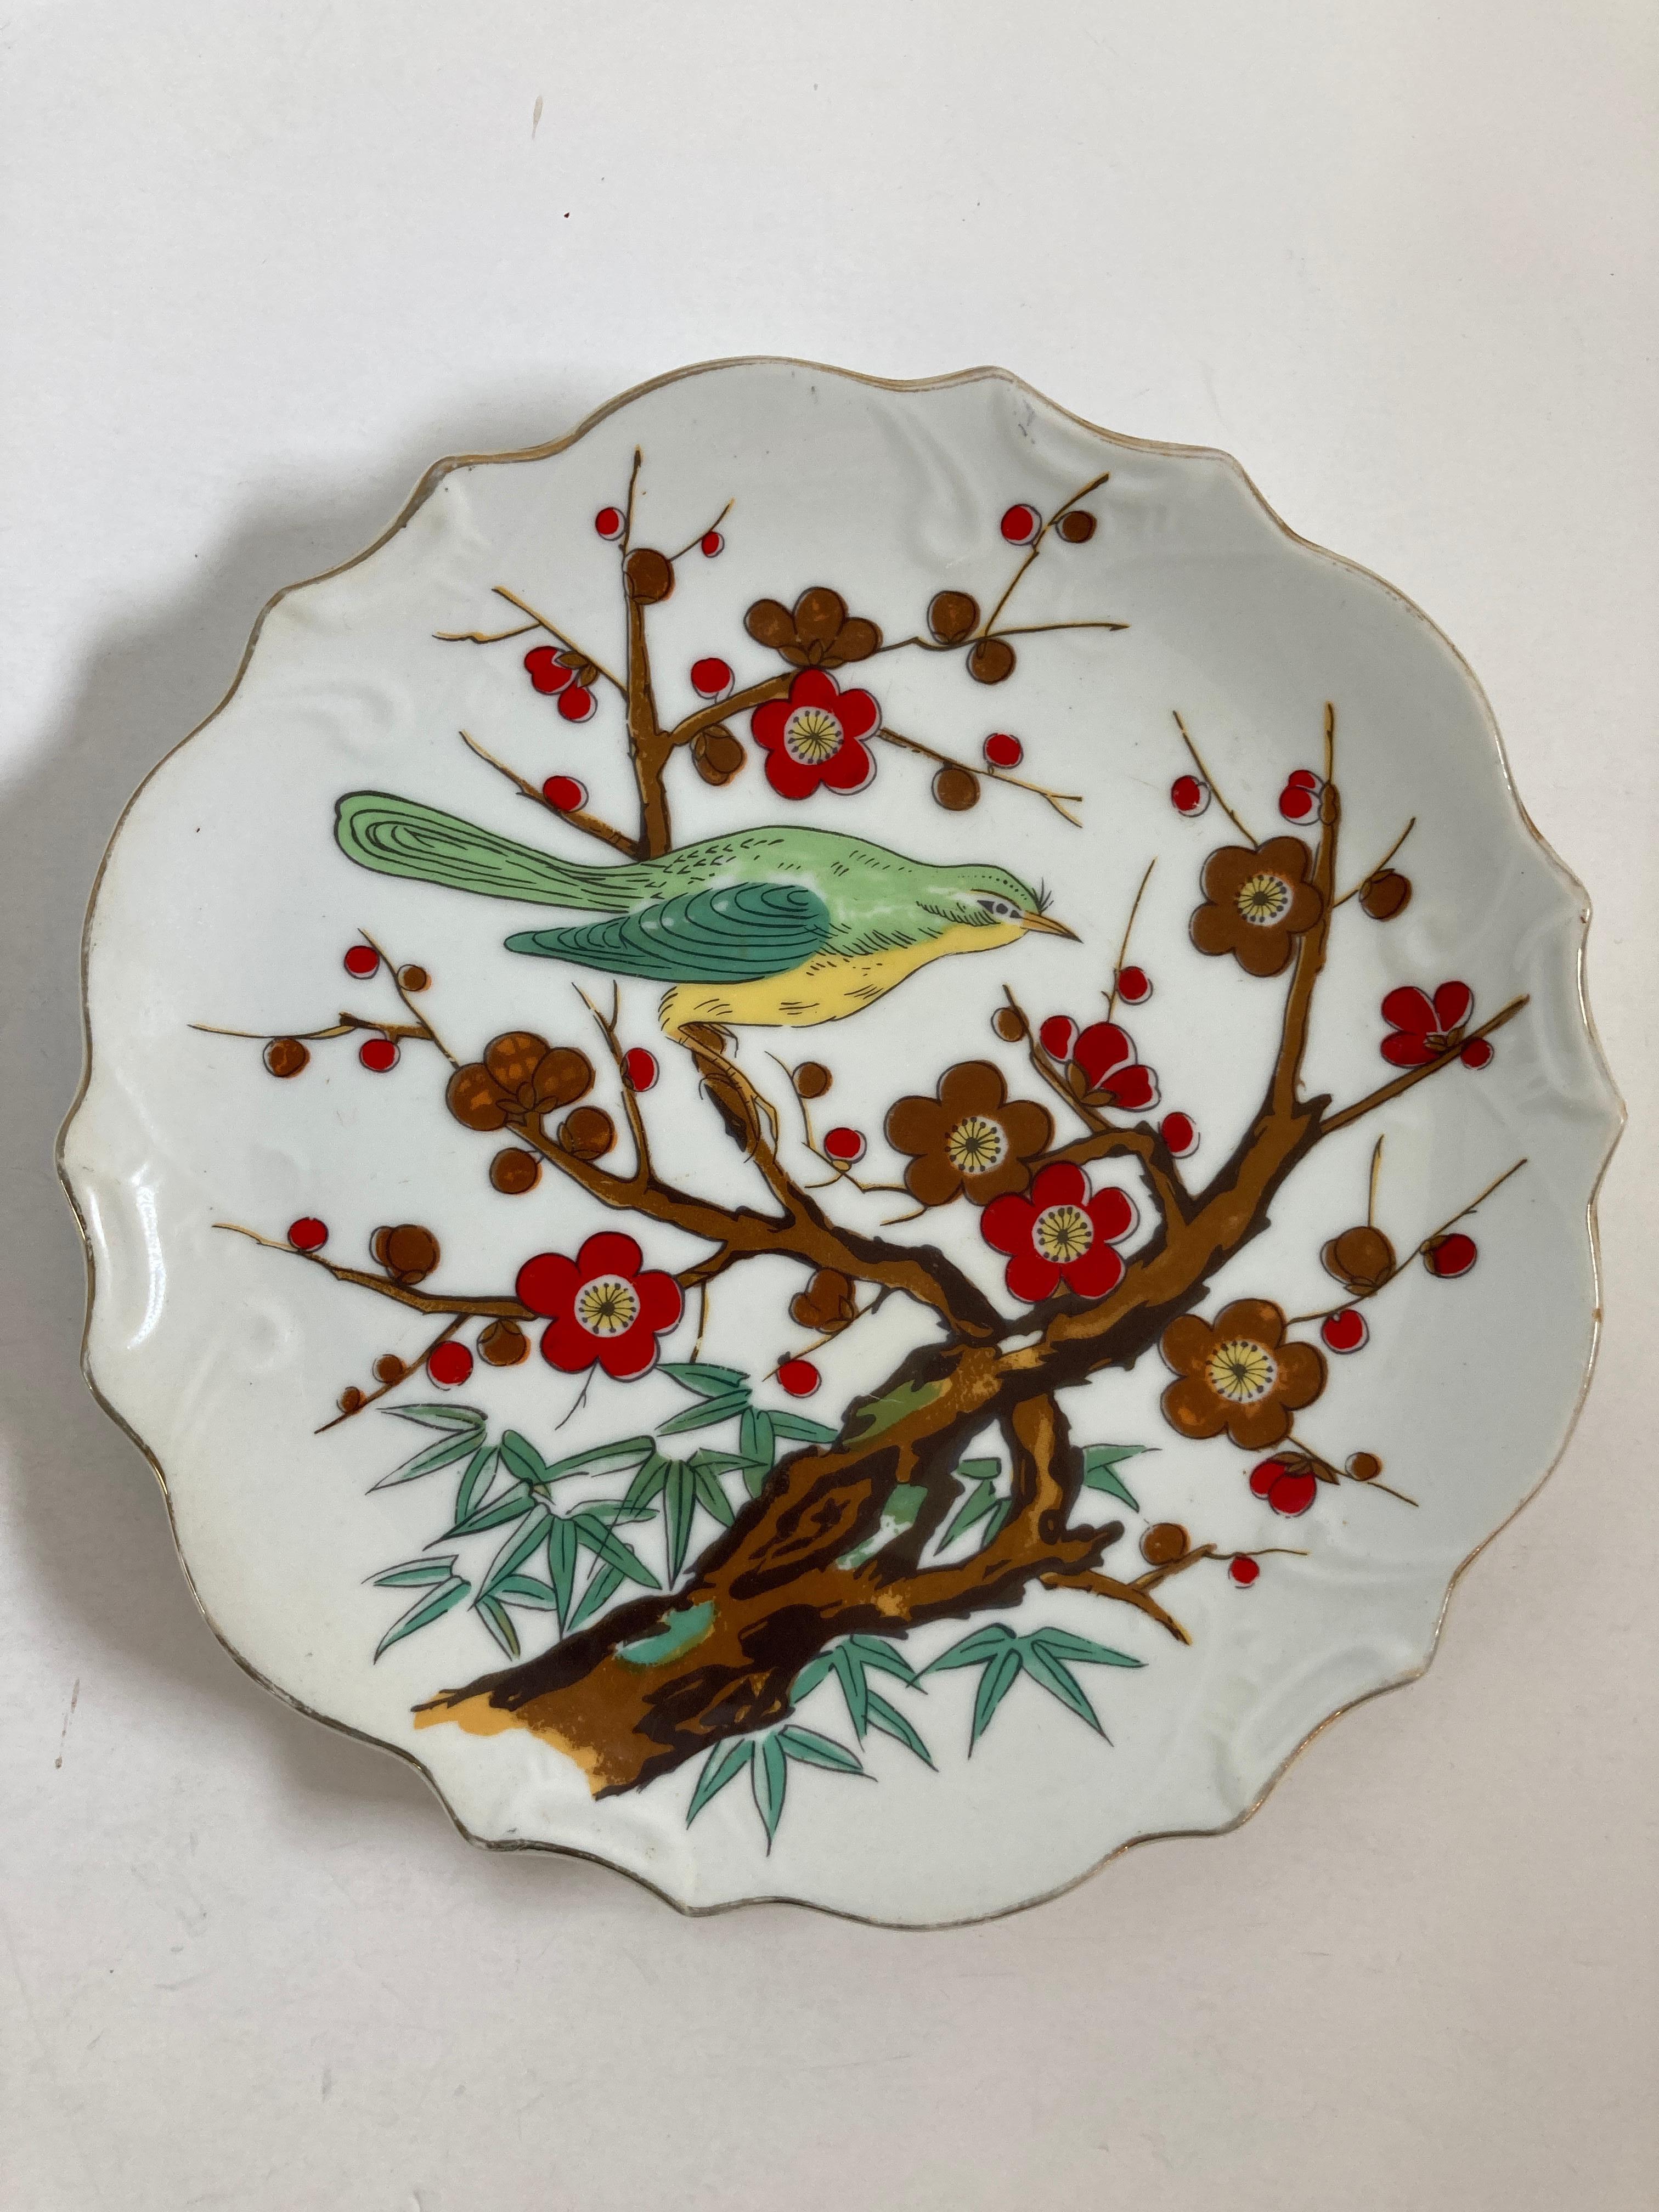 Hand painted French Porcelain collector hanging plate.
China porcelain decorative hanging plate hand painted with a bird on a branch, nice colors.
Witten in French in the back, for use only for decoration.
Ready to hang
Limoges style, made in